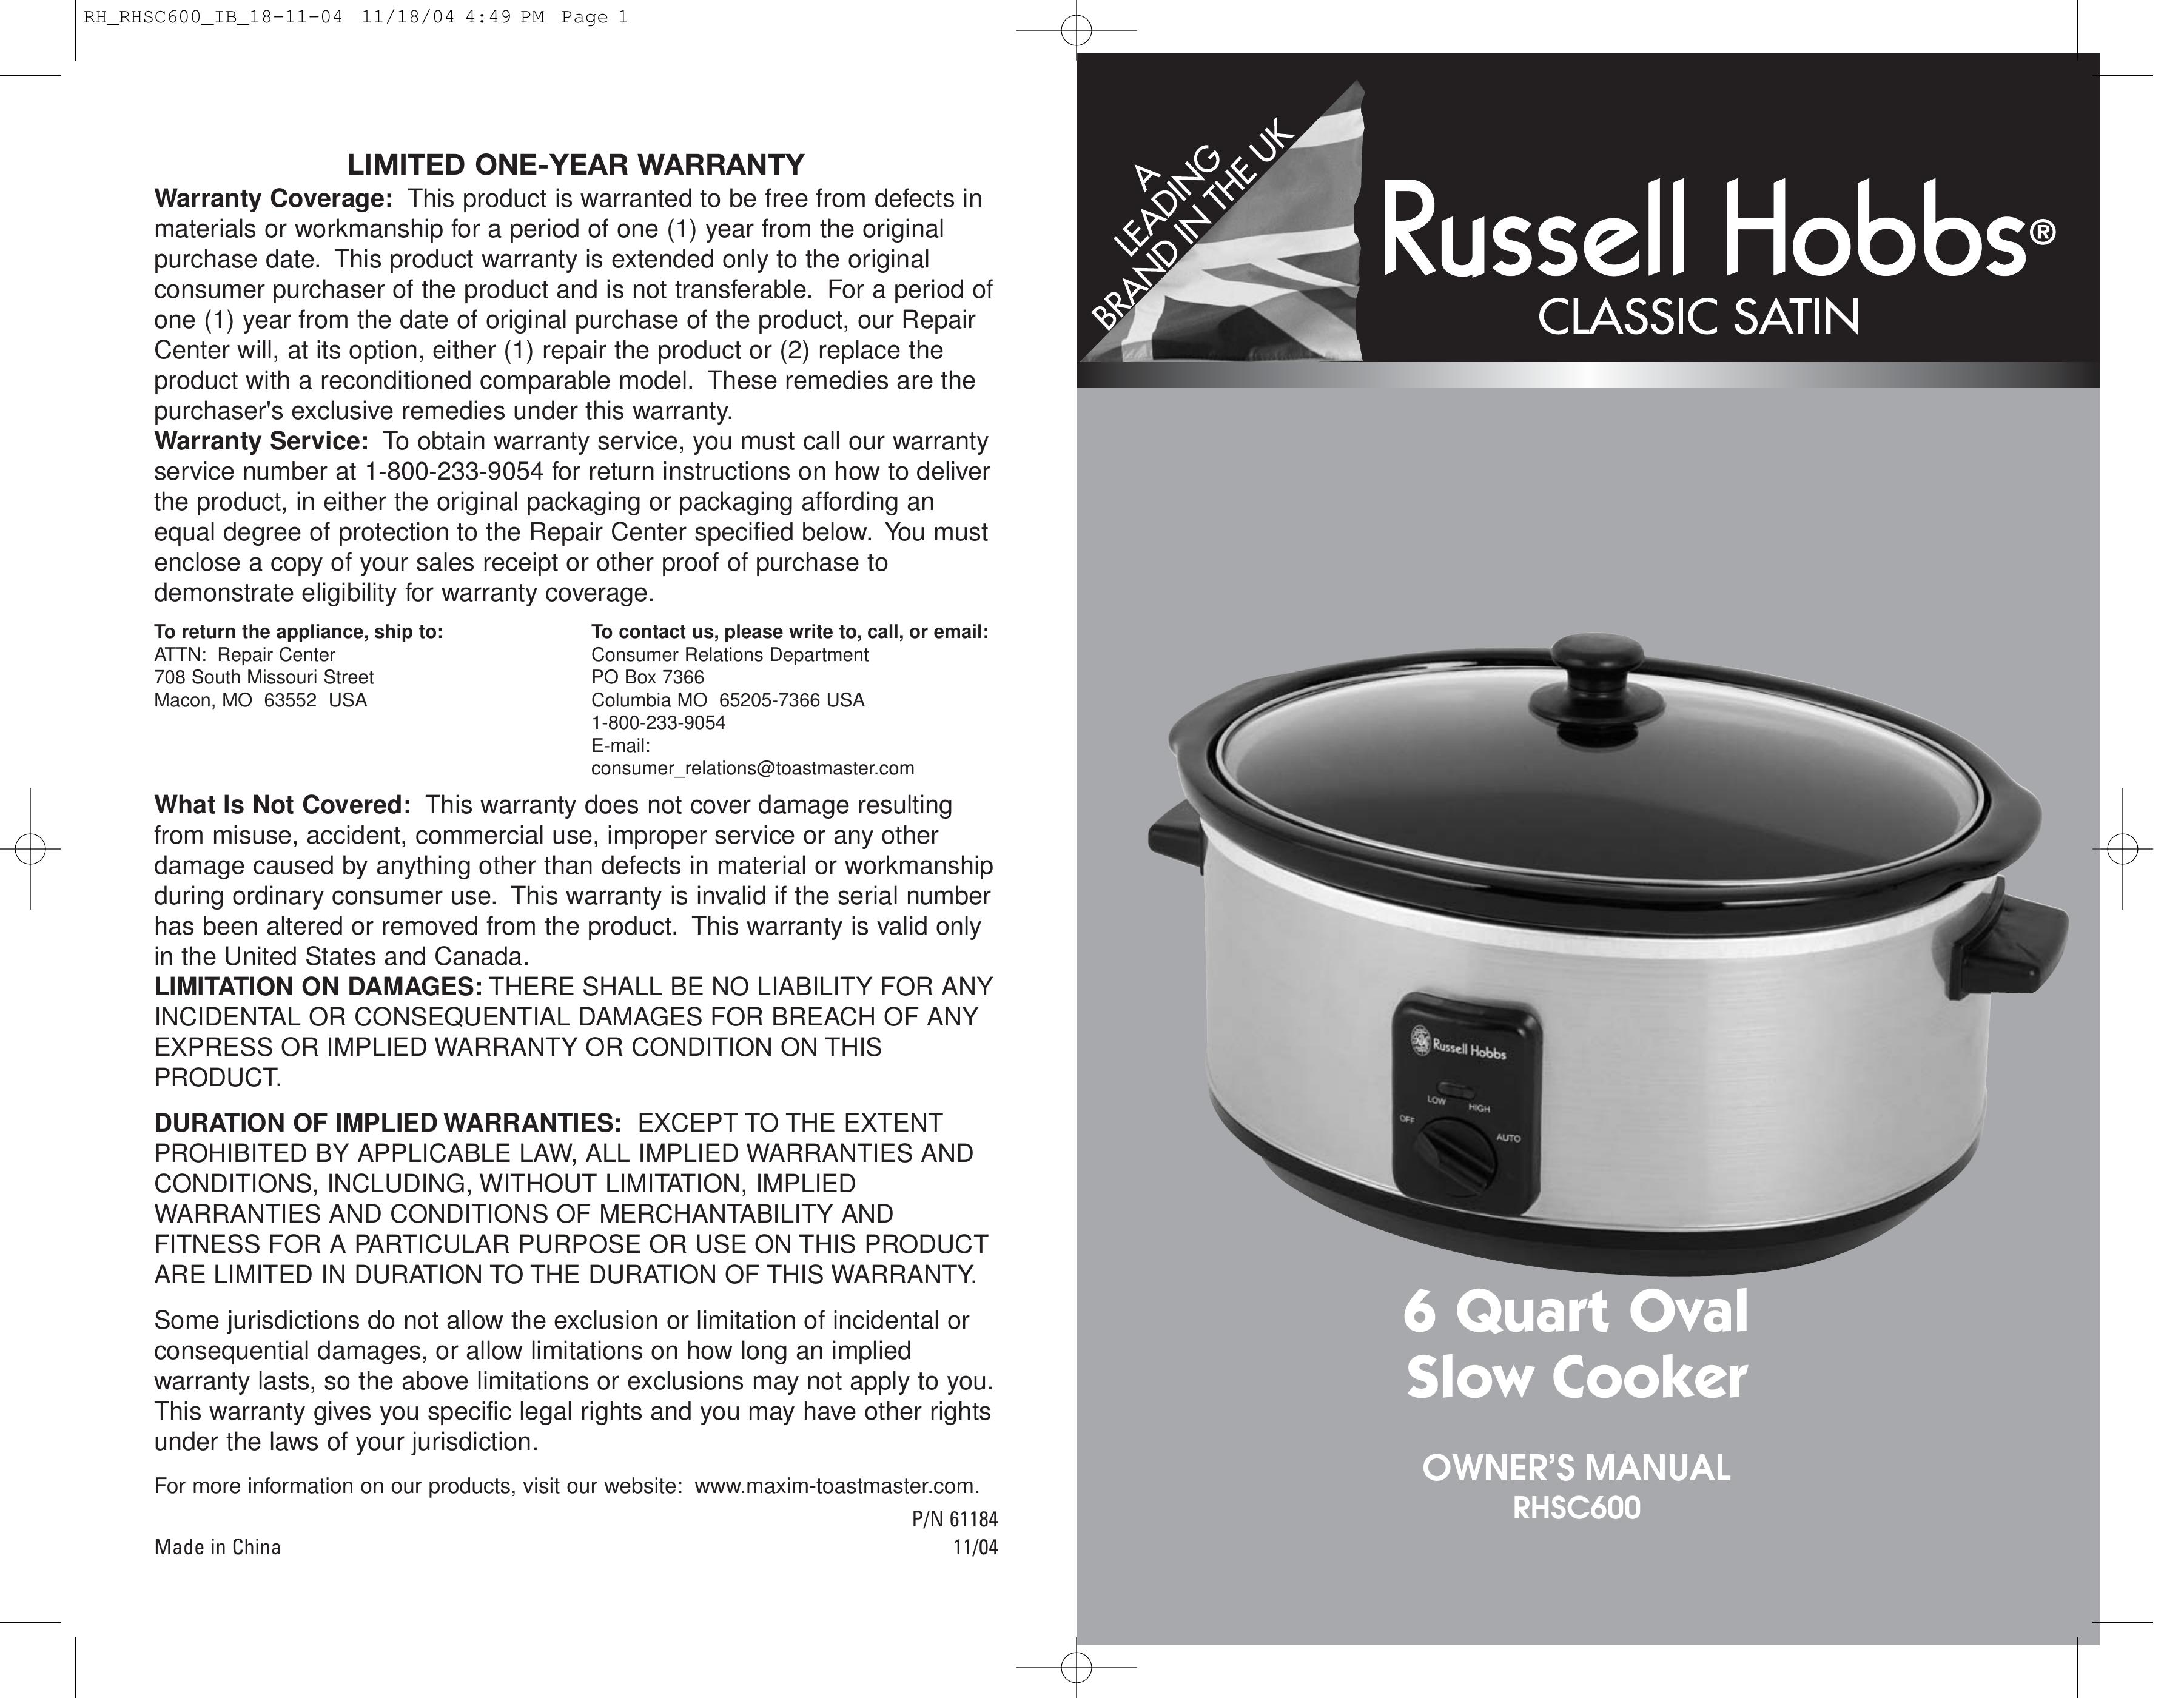 Toastmaster RHSC600 Slow Cooker User Manual